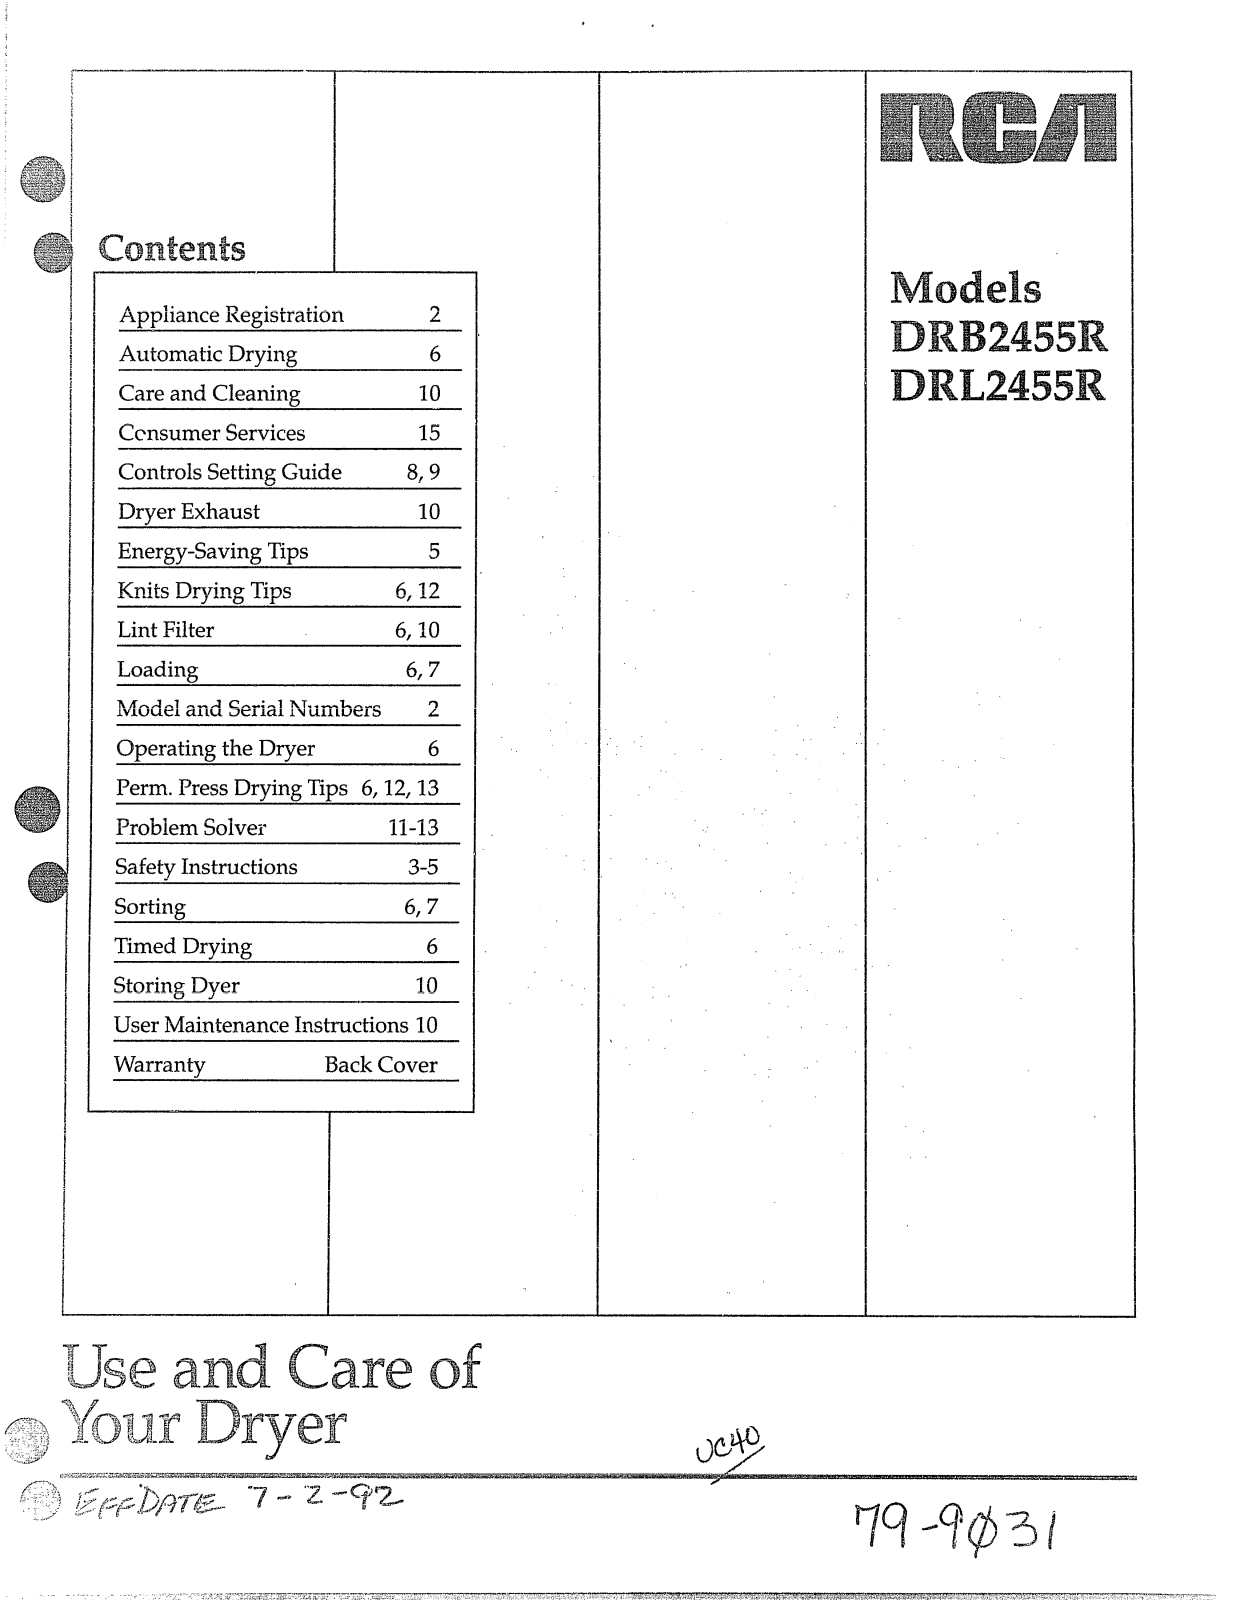 GE DRL2455R, DRB2455R Use and Care Manual